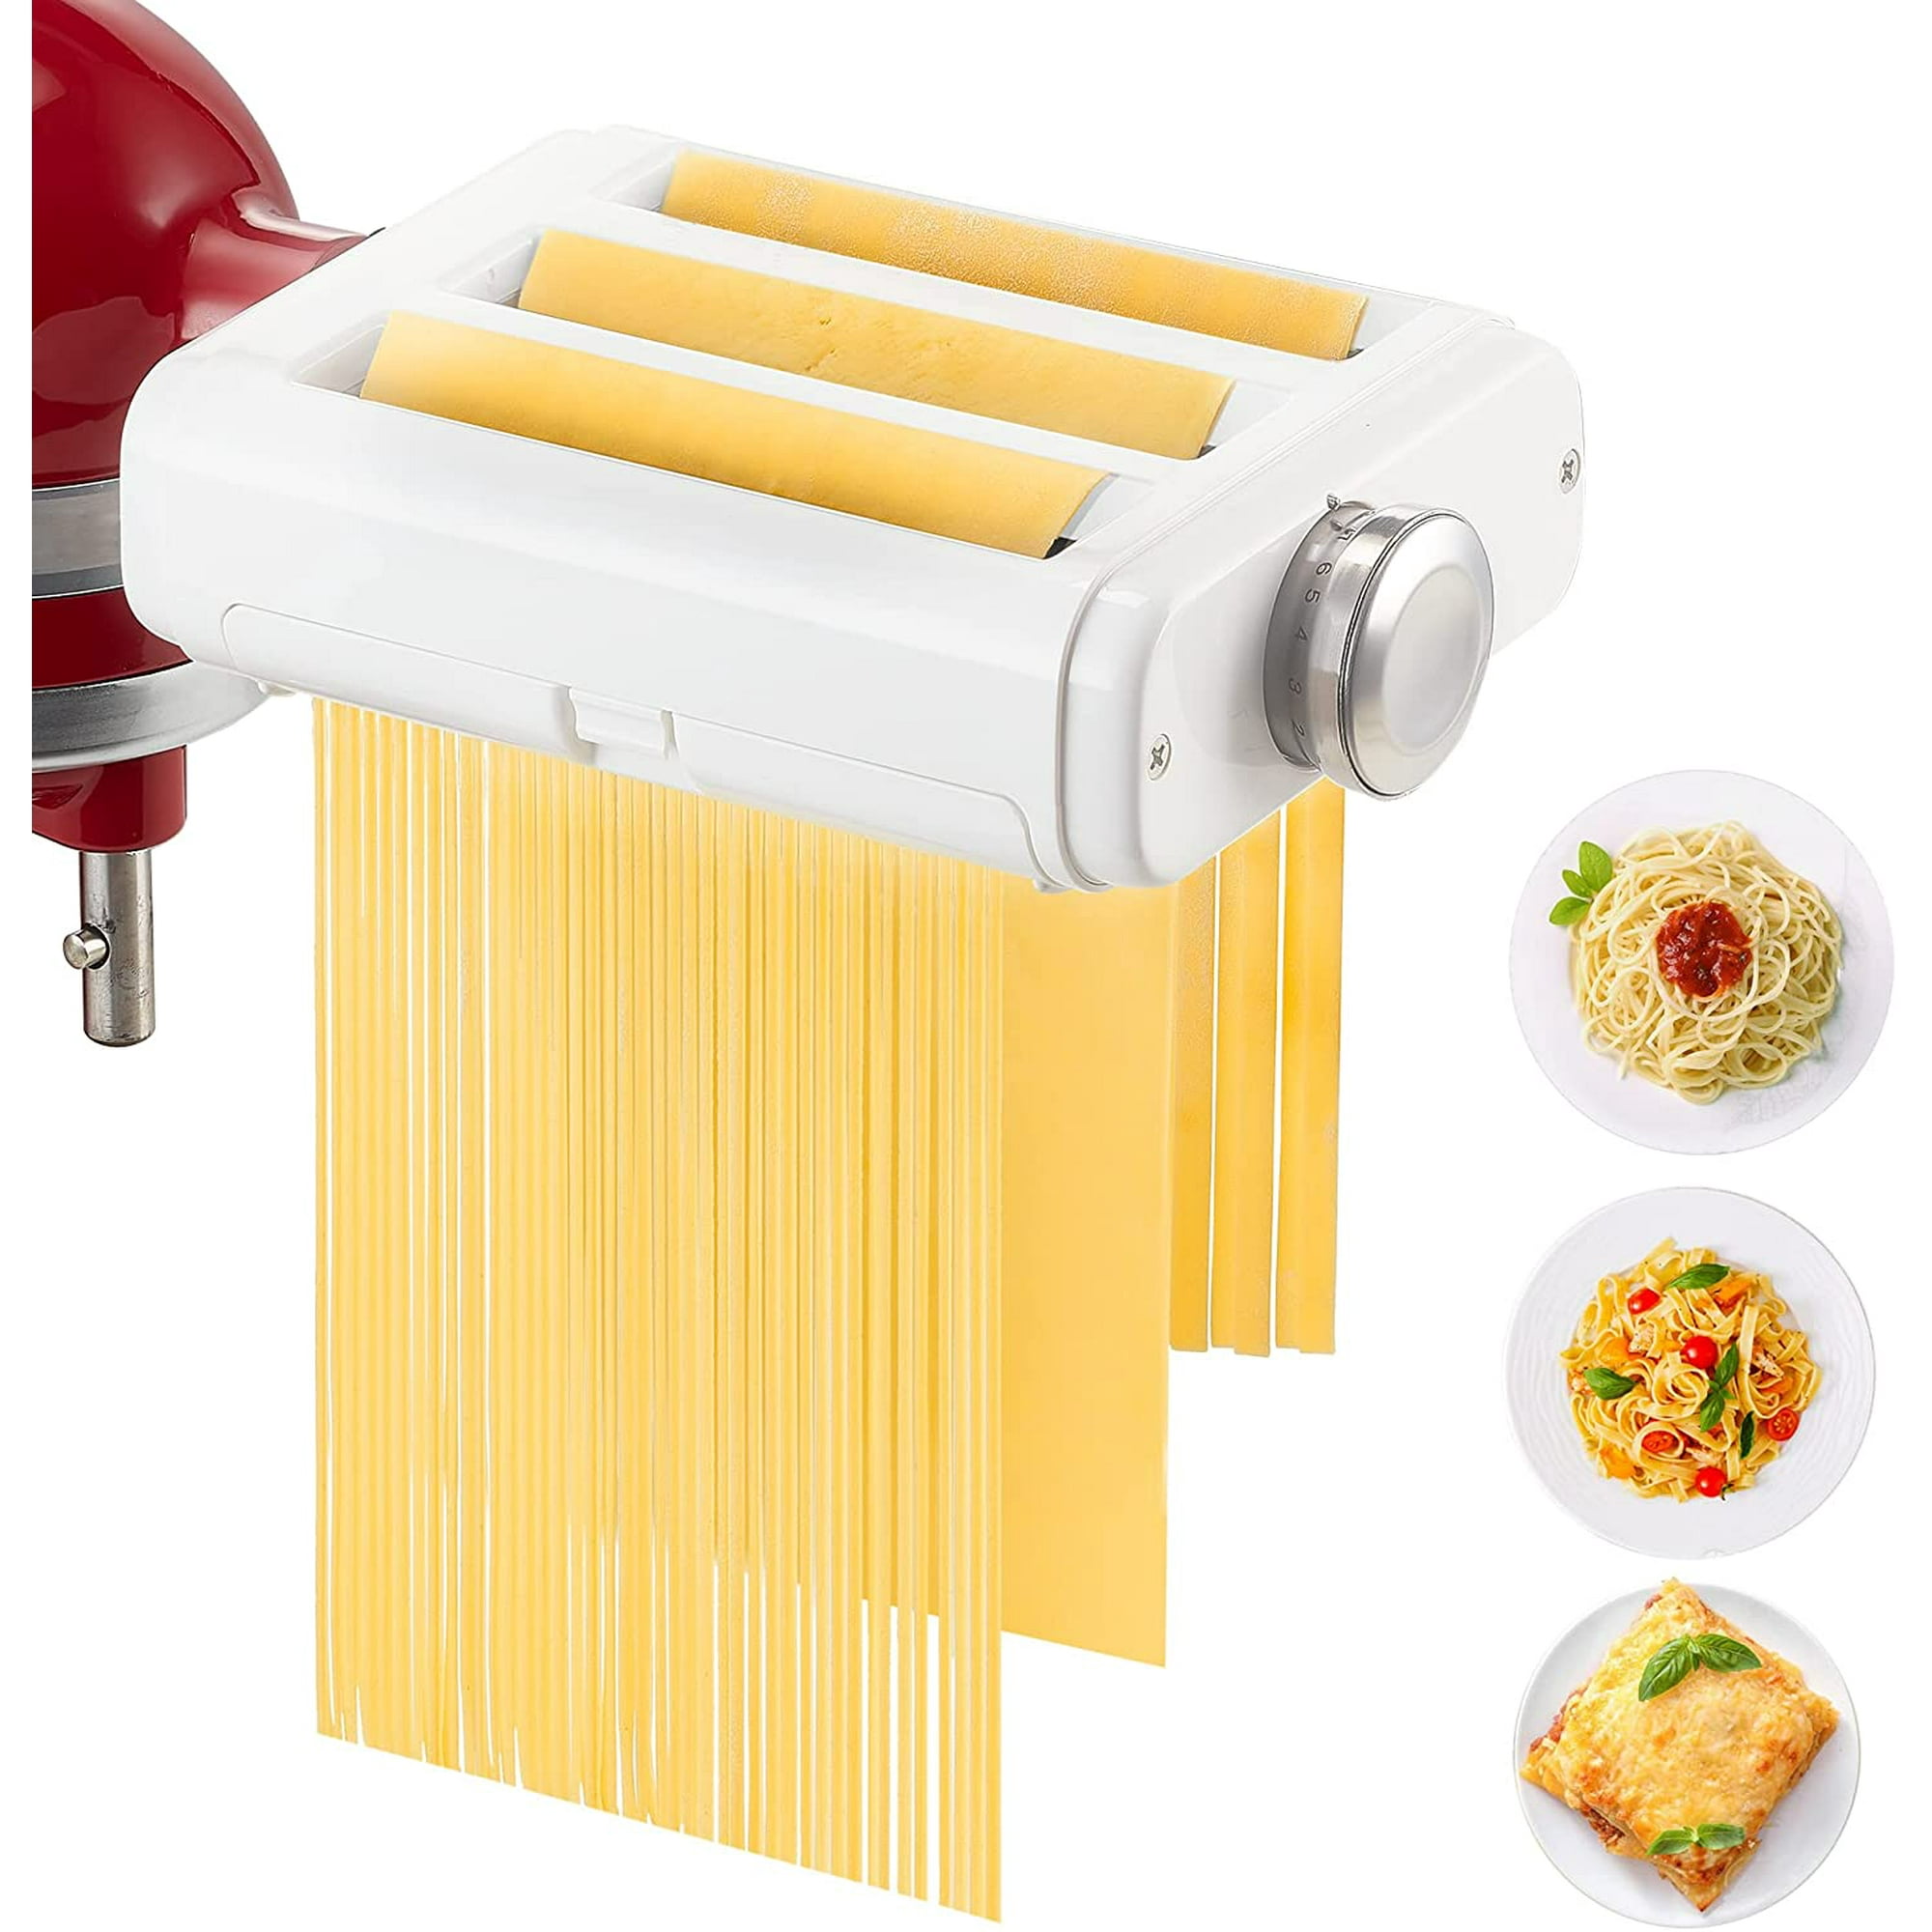 Universal Pasta Attachment Mixers, 3 in 1 Pasta Maker Accessories Homemade  Pasta, Include Pasta Sheet Roller, Angel Hair Spaghetti Cutter and  Fettuccine Cutter, Easy to Clean | Walmart Canada